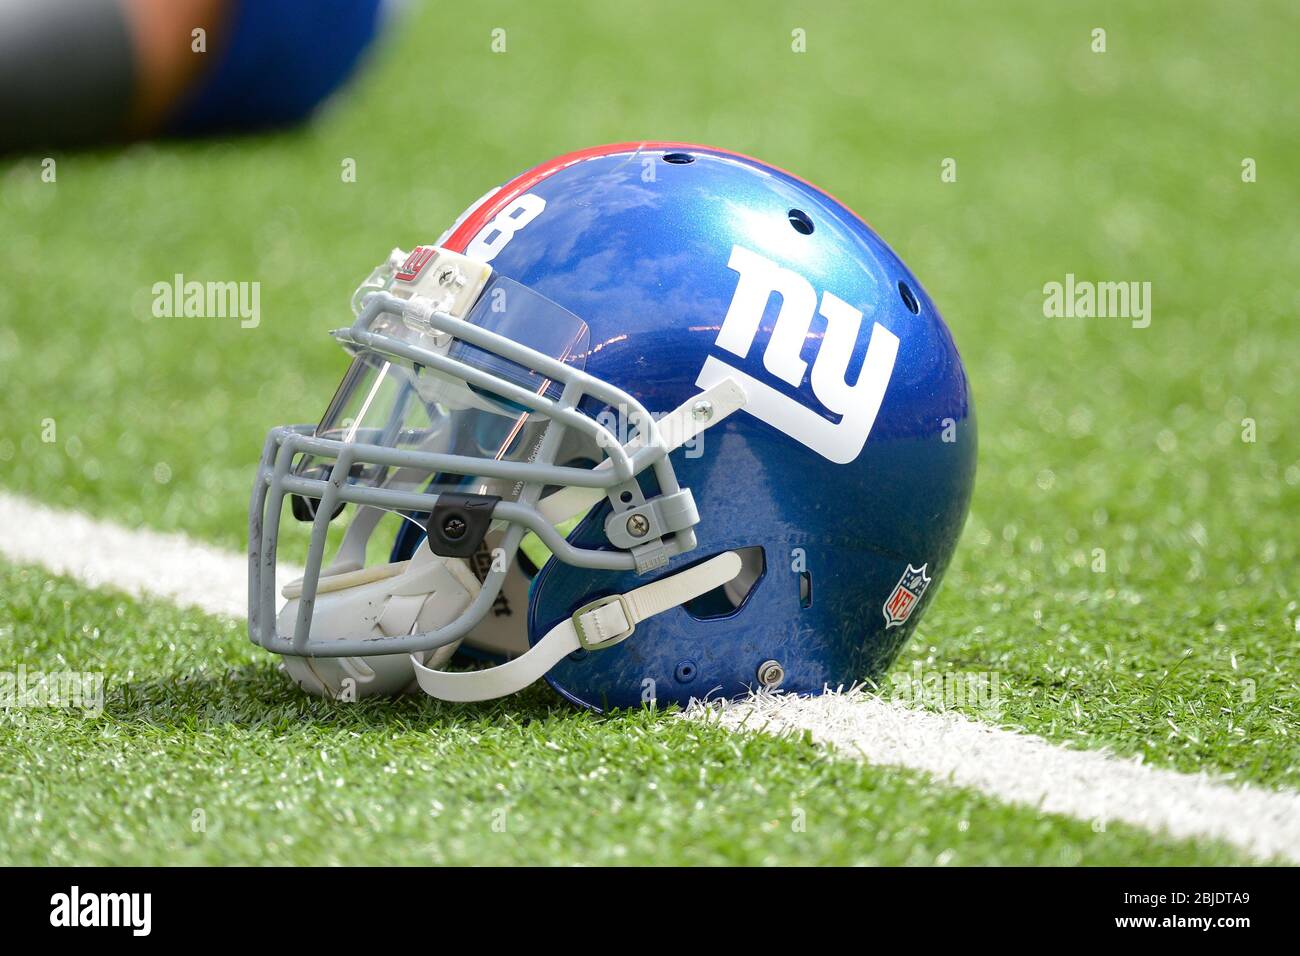 https://c8.alamy.com/comp/2BJDTA9/16-september-2012-new-york-giants-football-helmet-lays-on-the-turf-before-the-start-of-a-week-2-nfl-nfc-matchup-between-the-tampa-bay-buccaneers-and-2BJDTA9.jpg